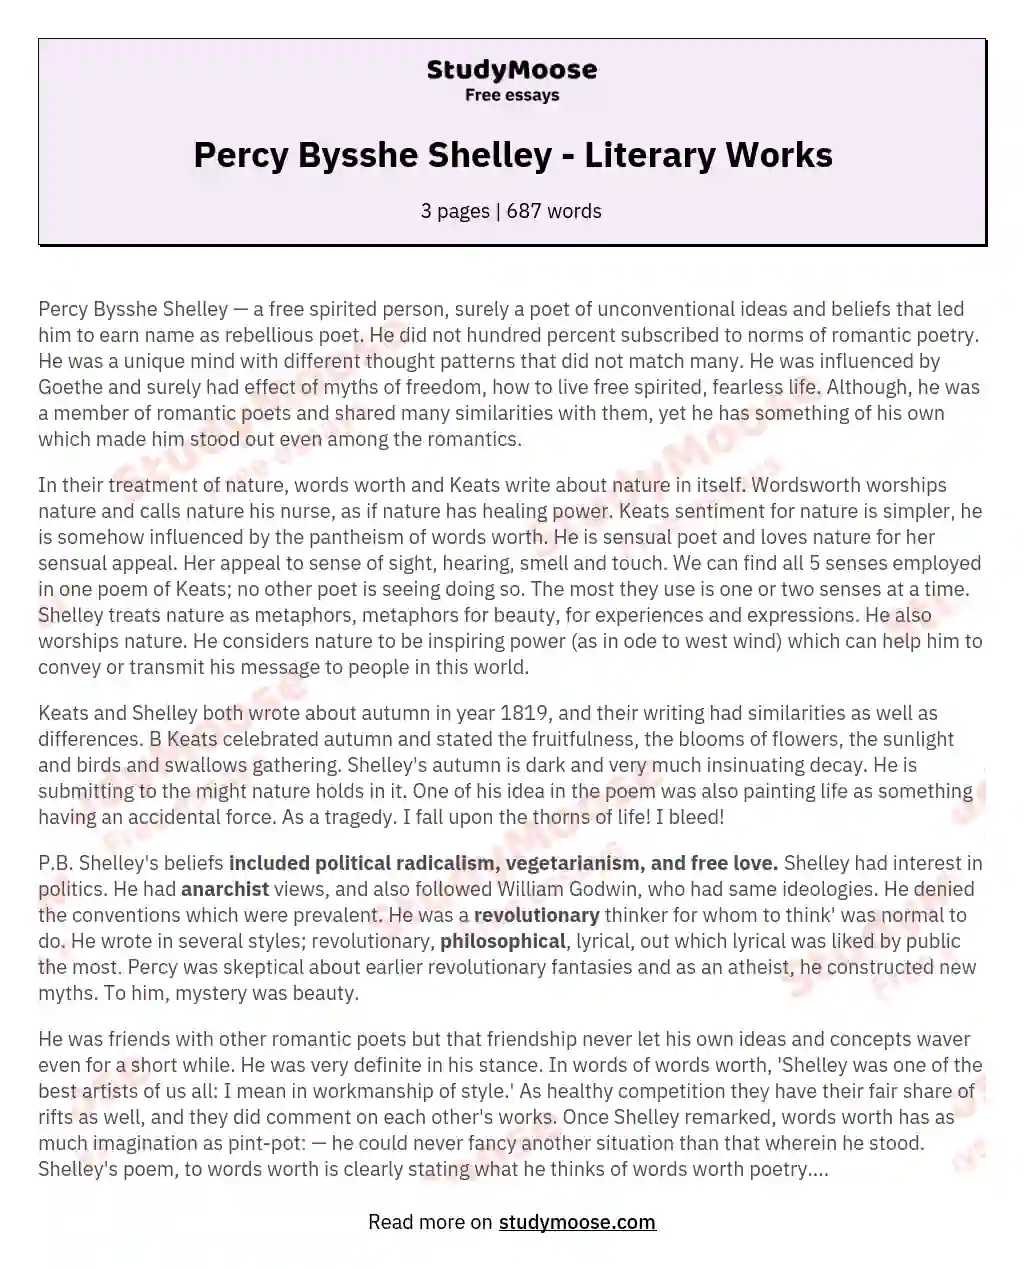 Percy Bysshe Shelley - Literary Works